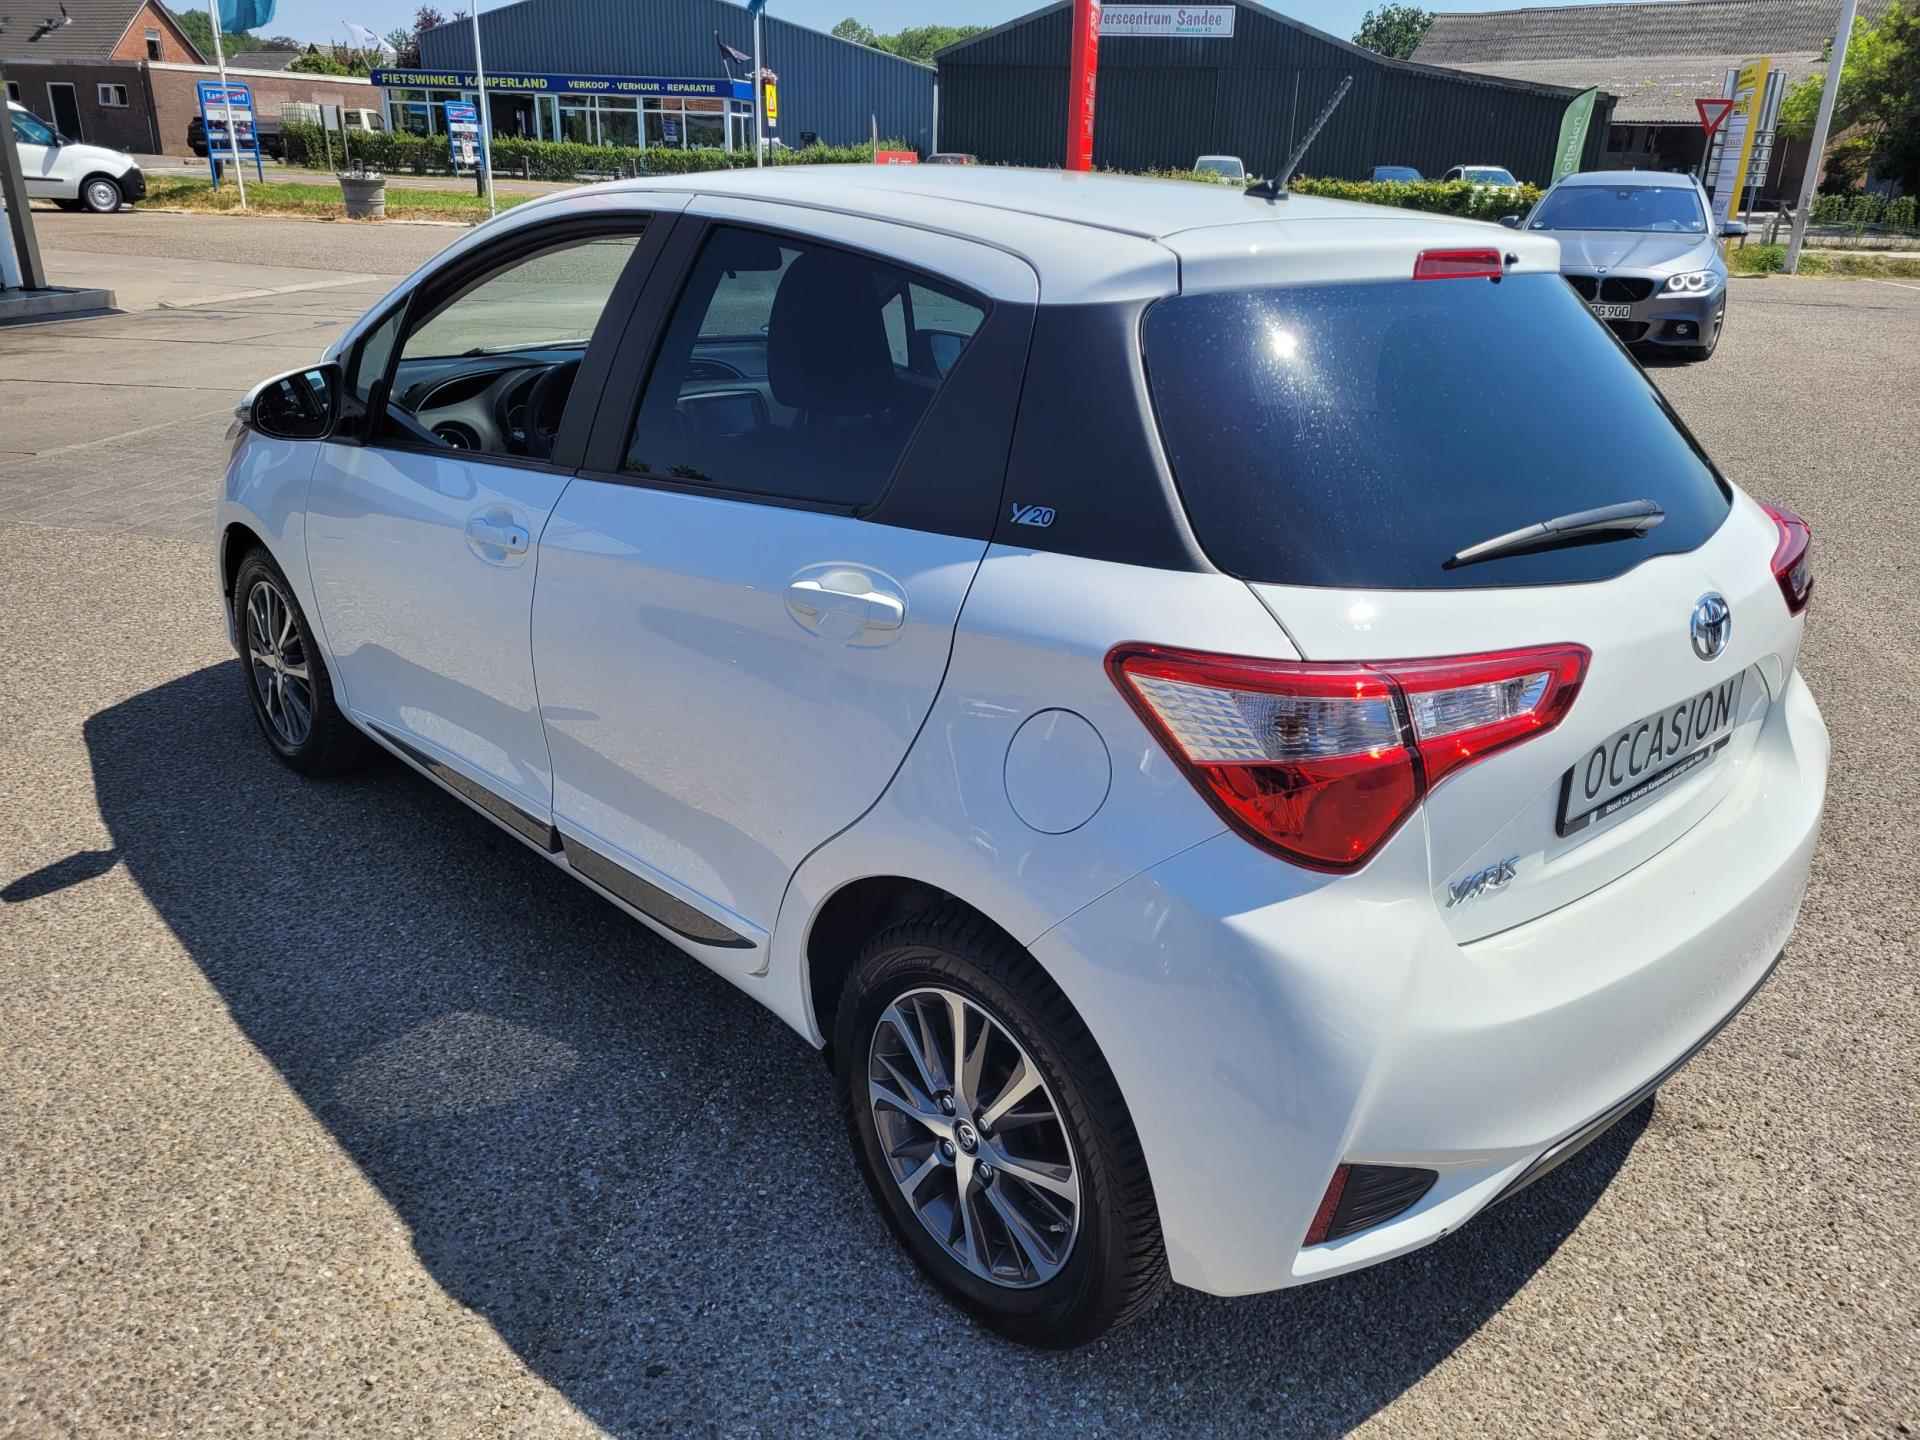 Toyota Yaris 1.5 VVT-i Dynamic Y20 AUTOMAAT / APPLE+ANDROID CAR PLAY / BTW Auto - 5/30